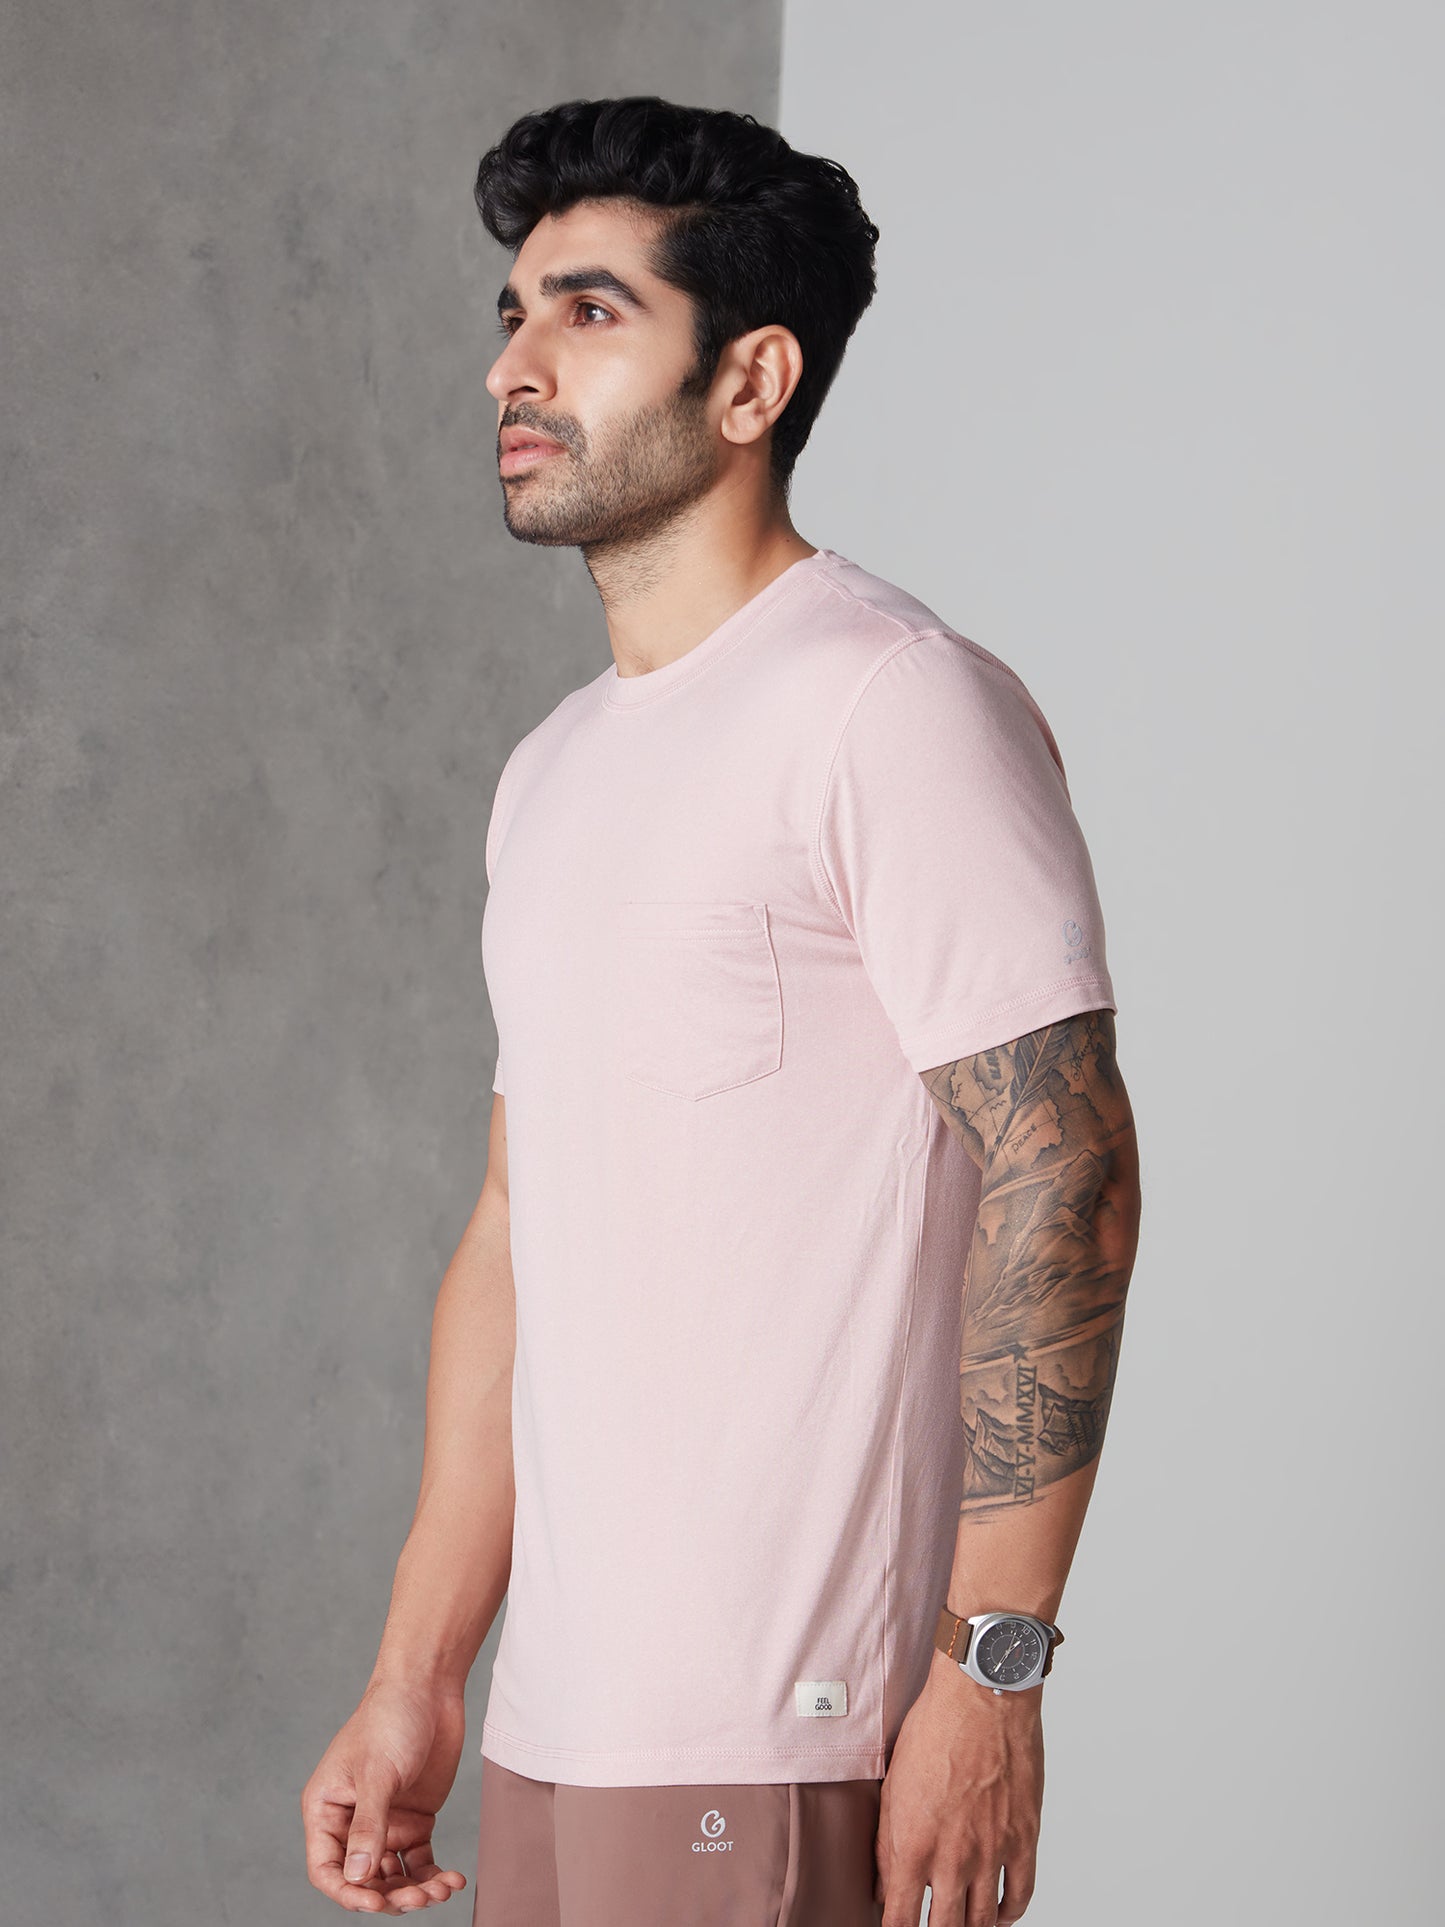 Active Soft Tee Lilac